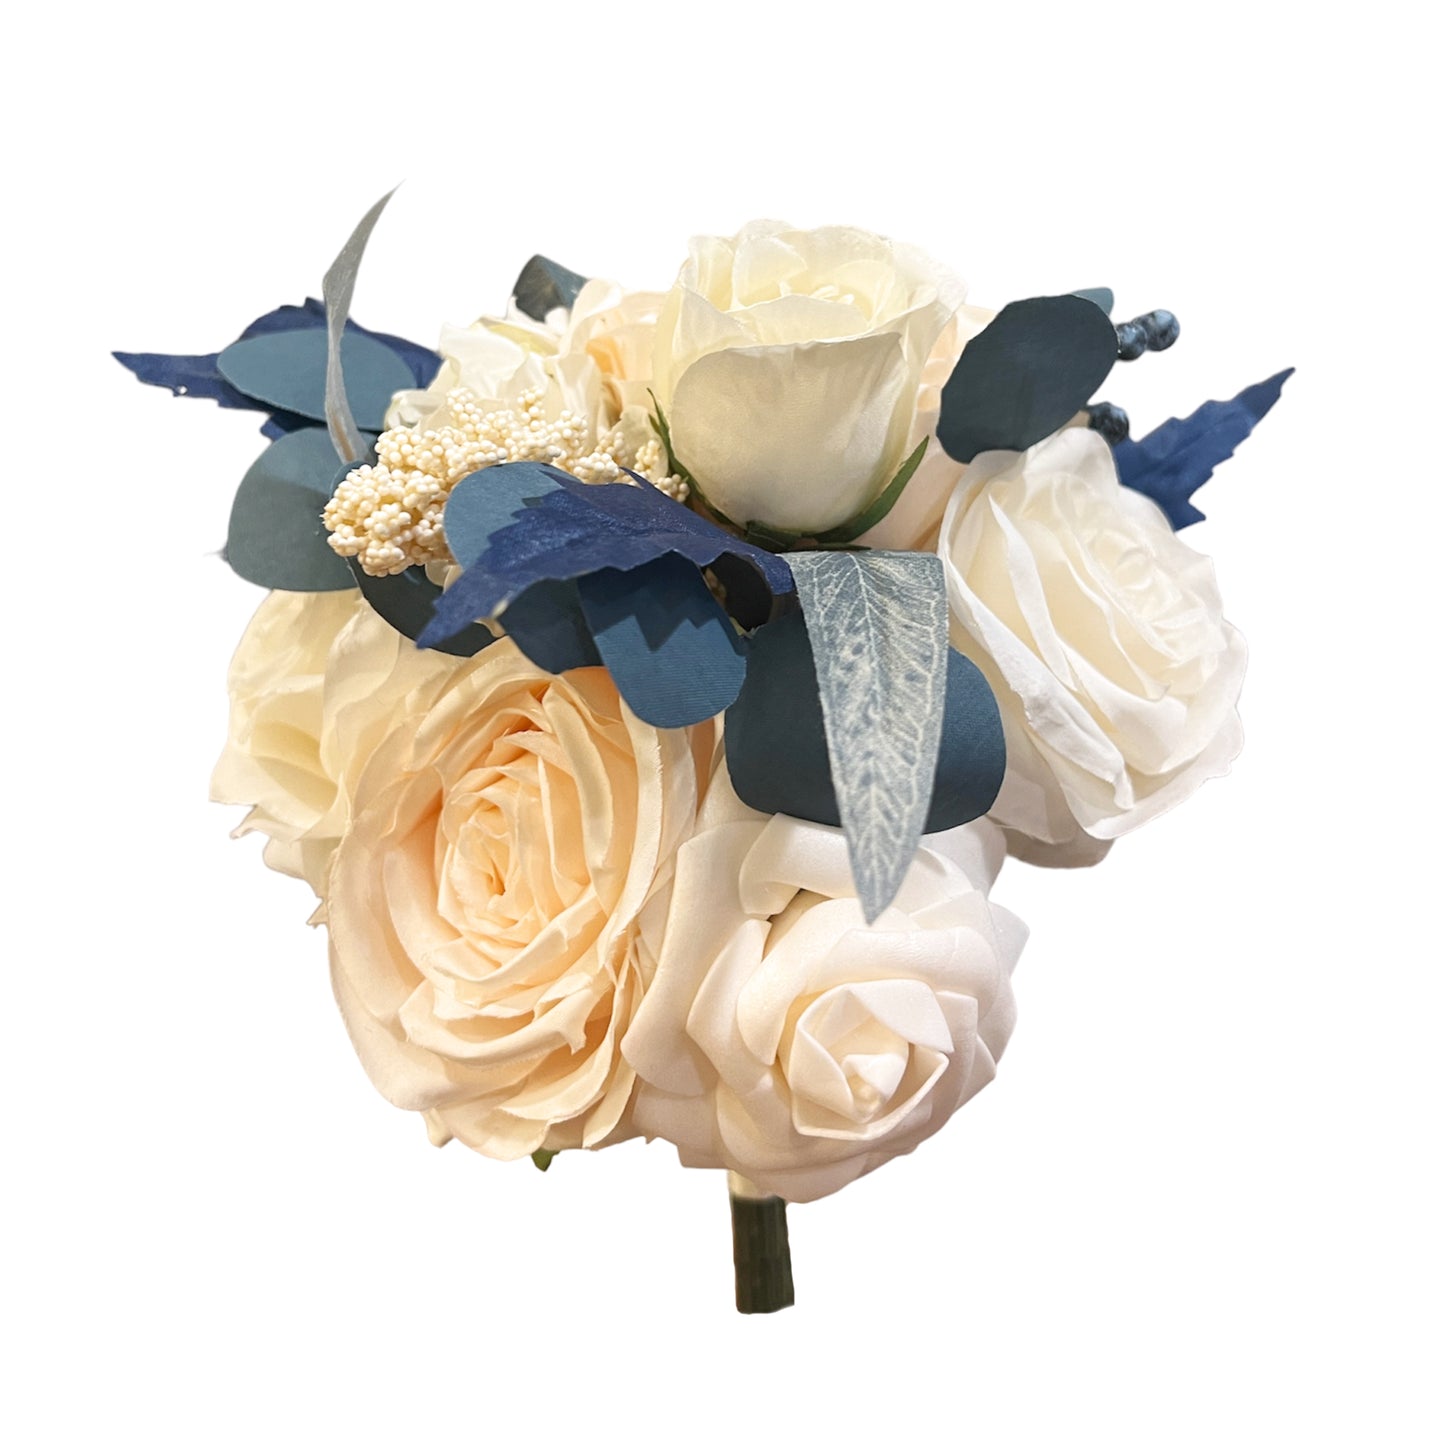 Artificial Roses Wedding Bouquet with Navy Teal Leaves and Blueberry for Brides and Bridesmaids